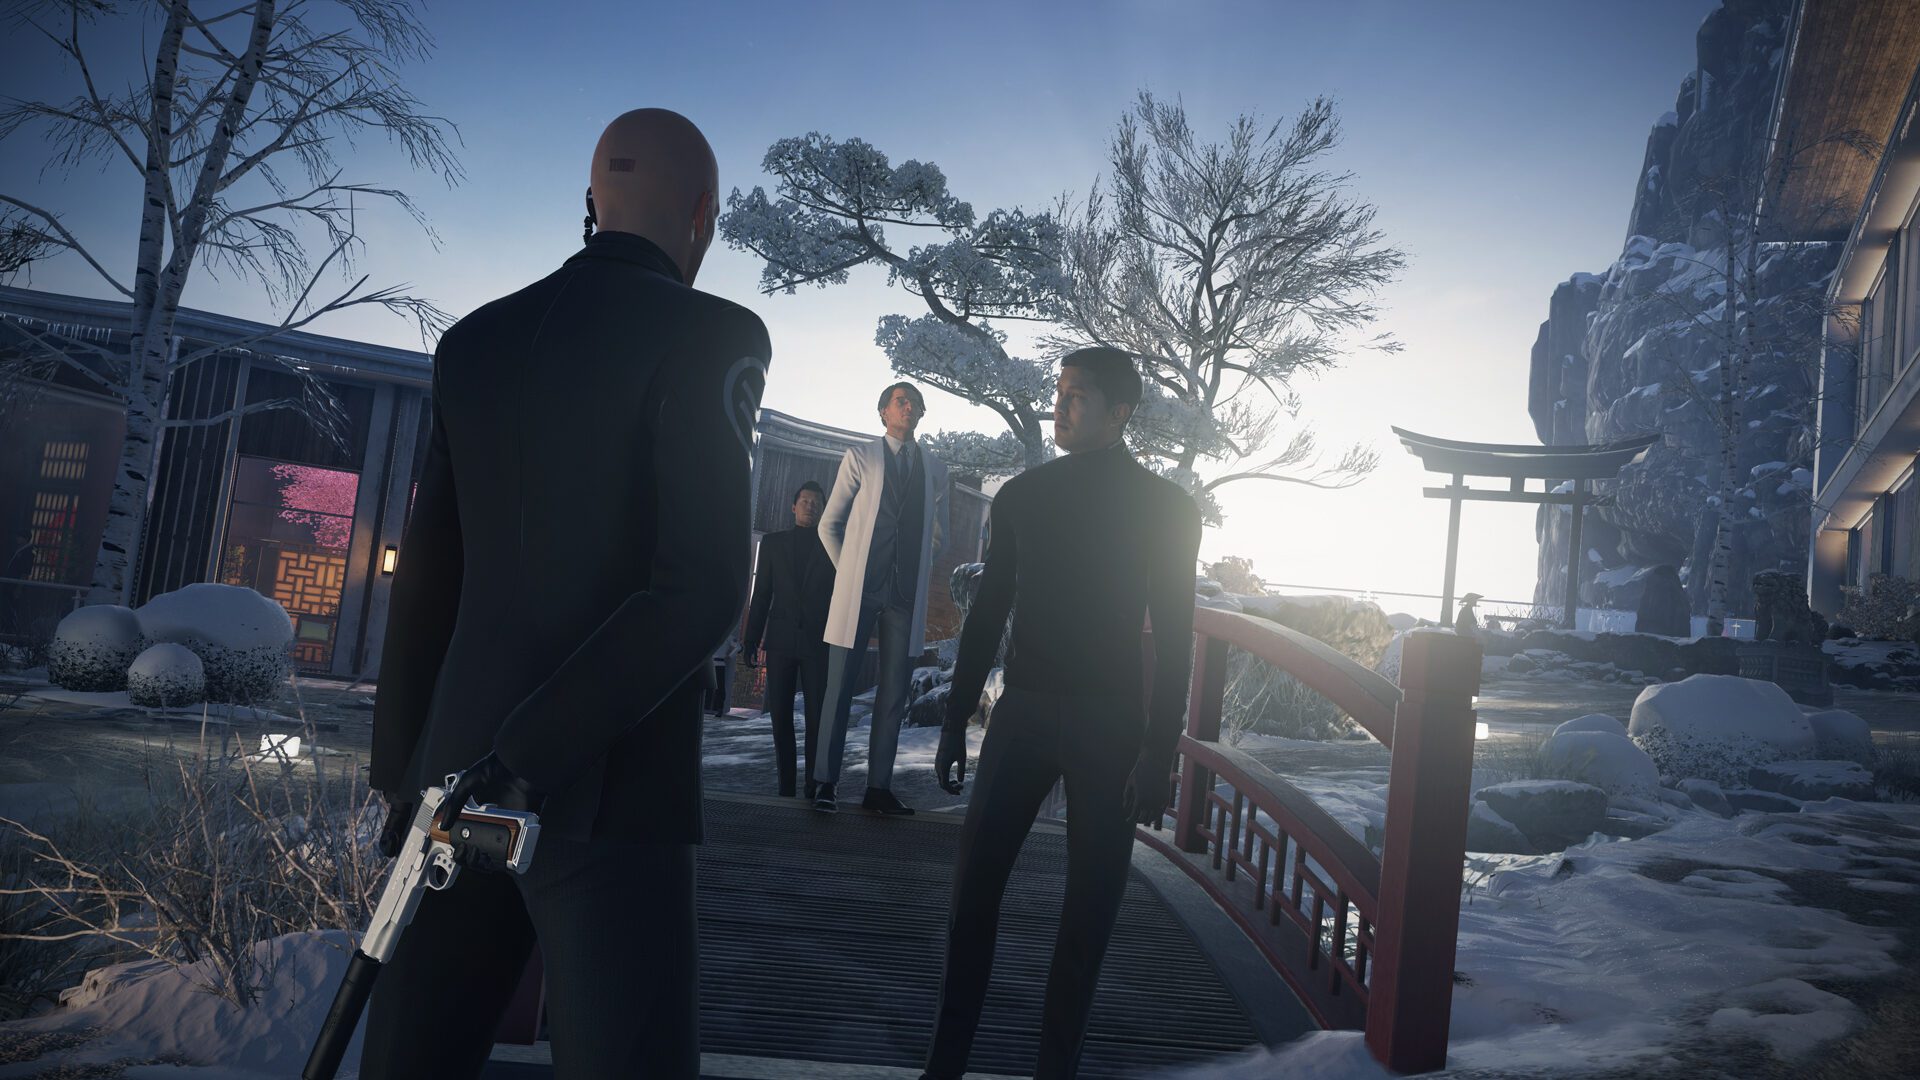 Square Enix Says goodbye to hitman developer featured